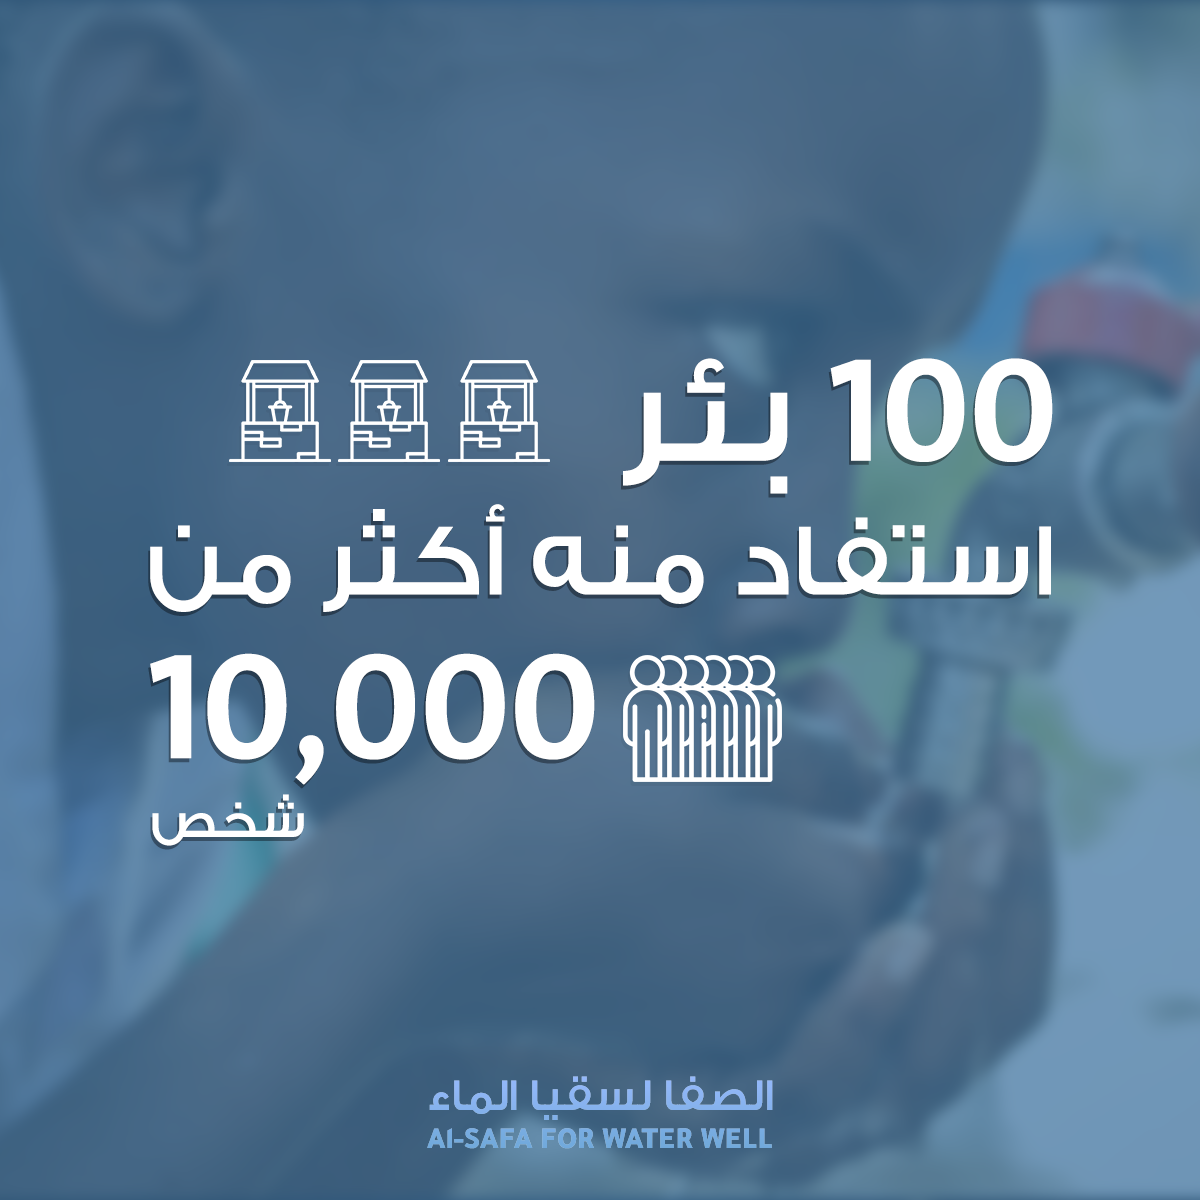 ads campaign campaing charity design donation facebook marketing   NGO water